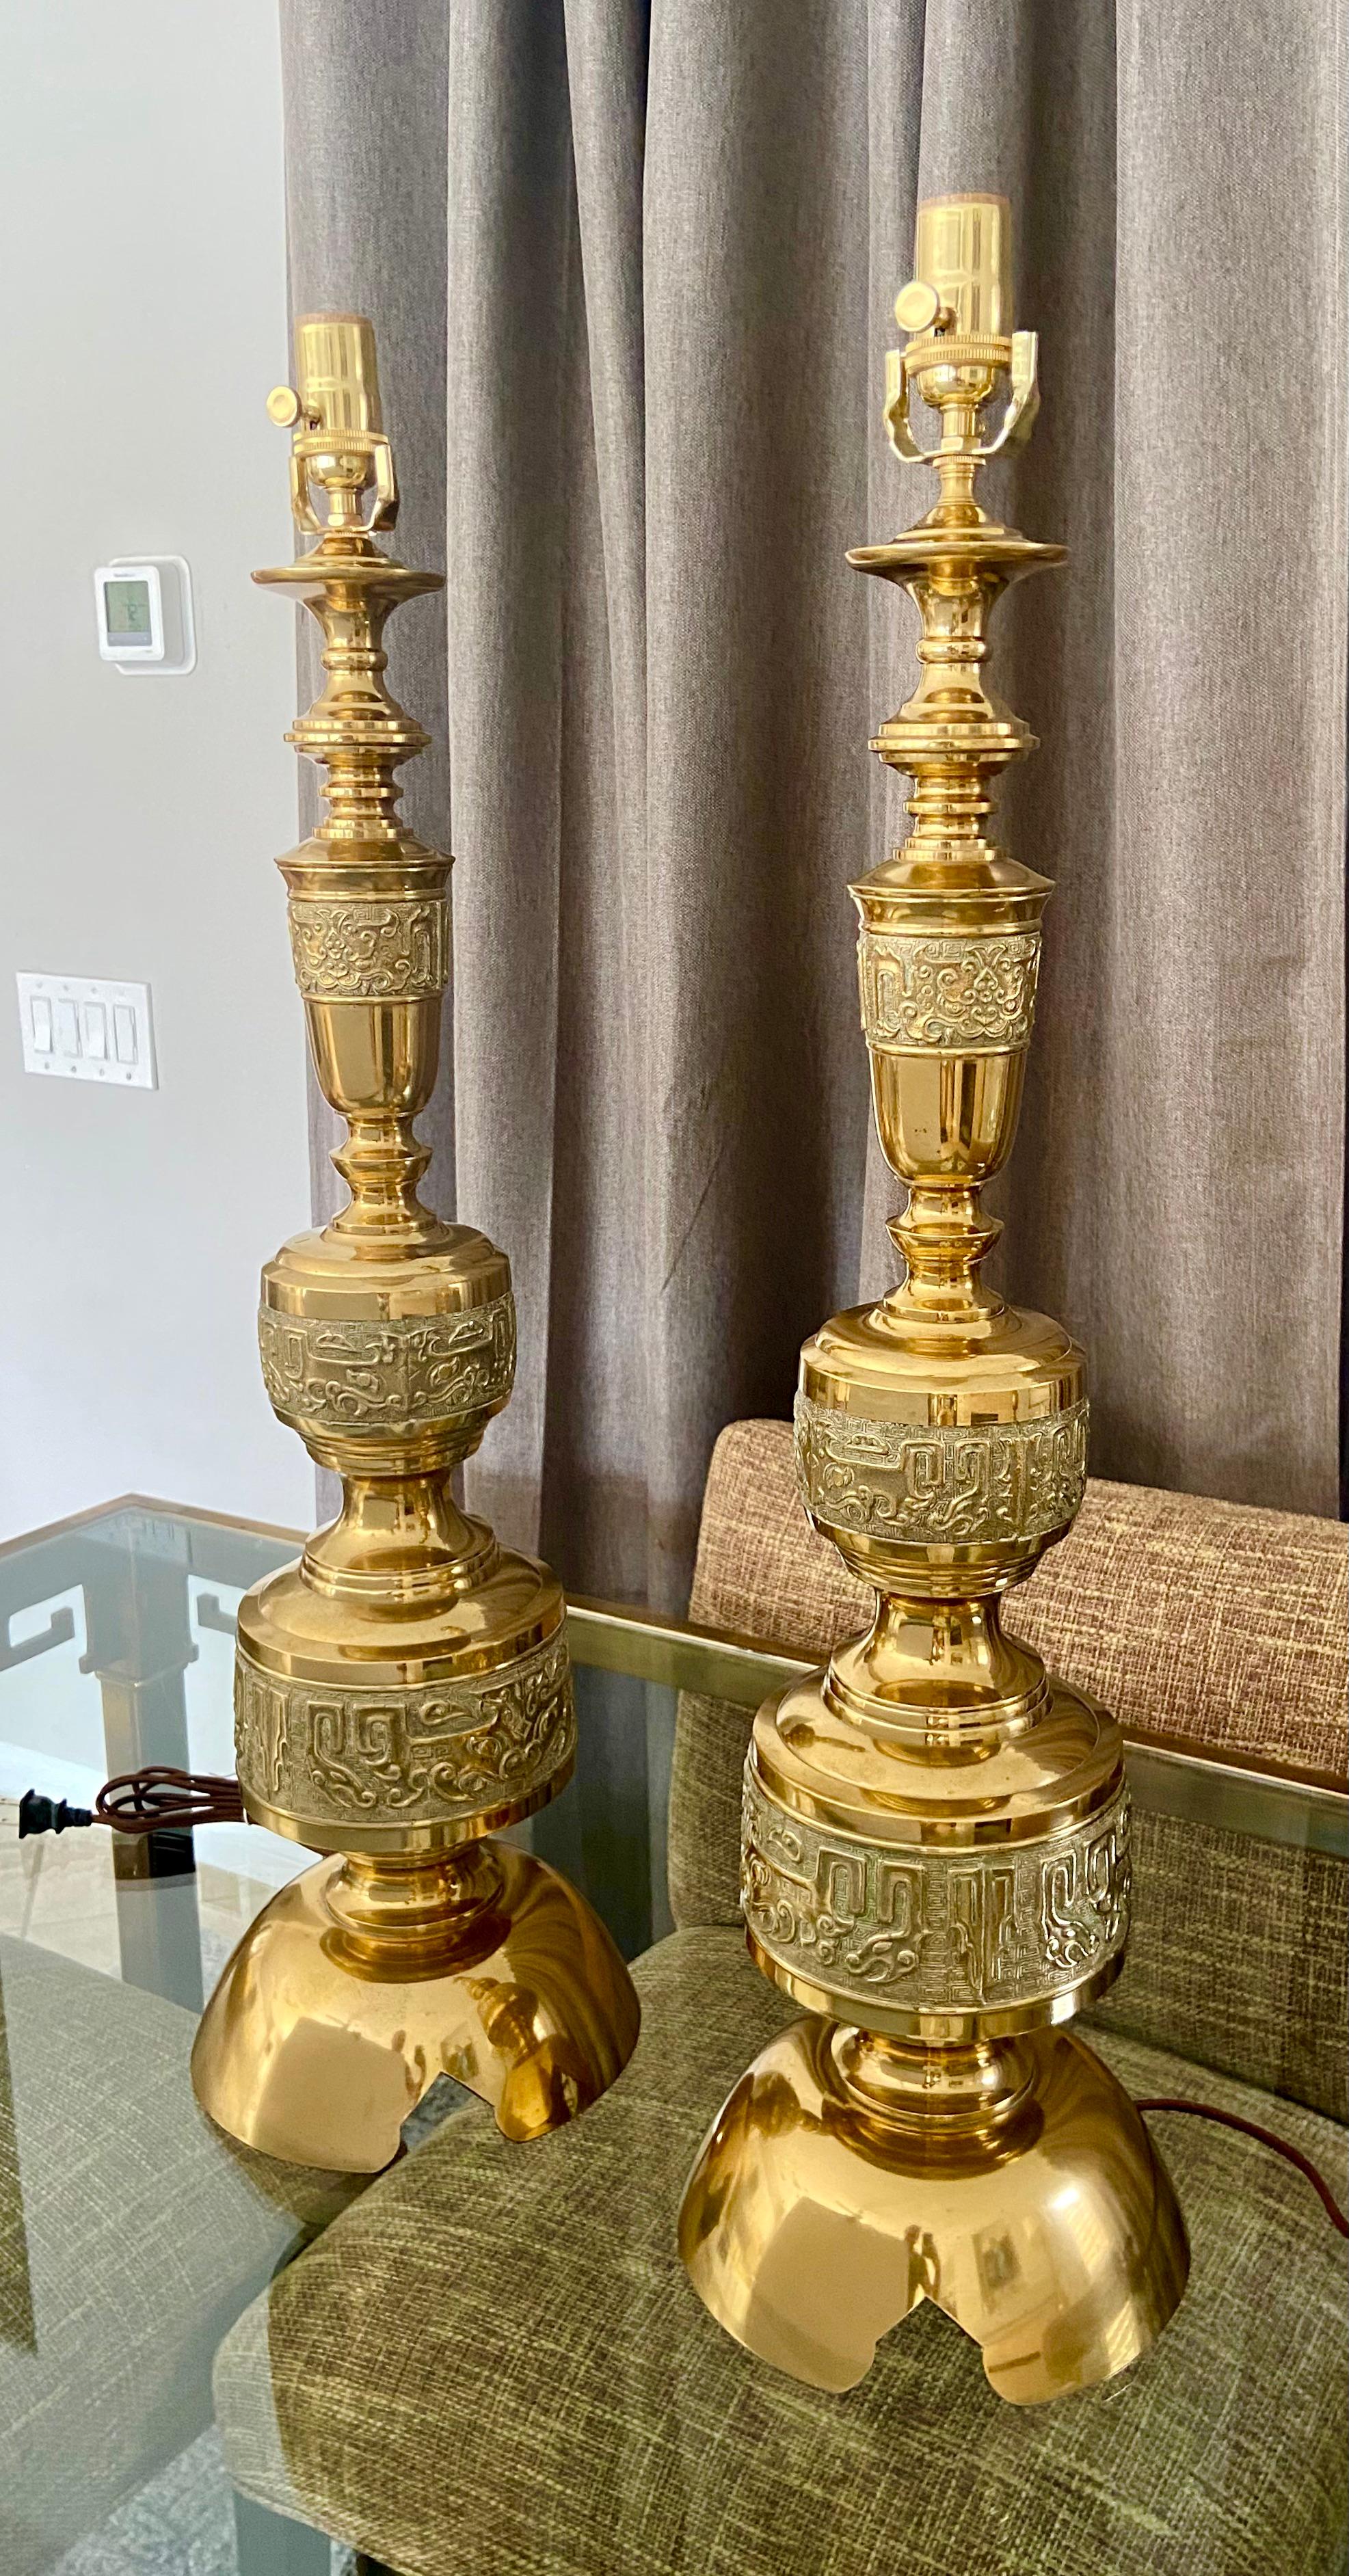 Mid-20th Century Pair of James Mont Asian Inspired Brass Table Lamps For Sale